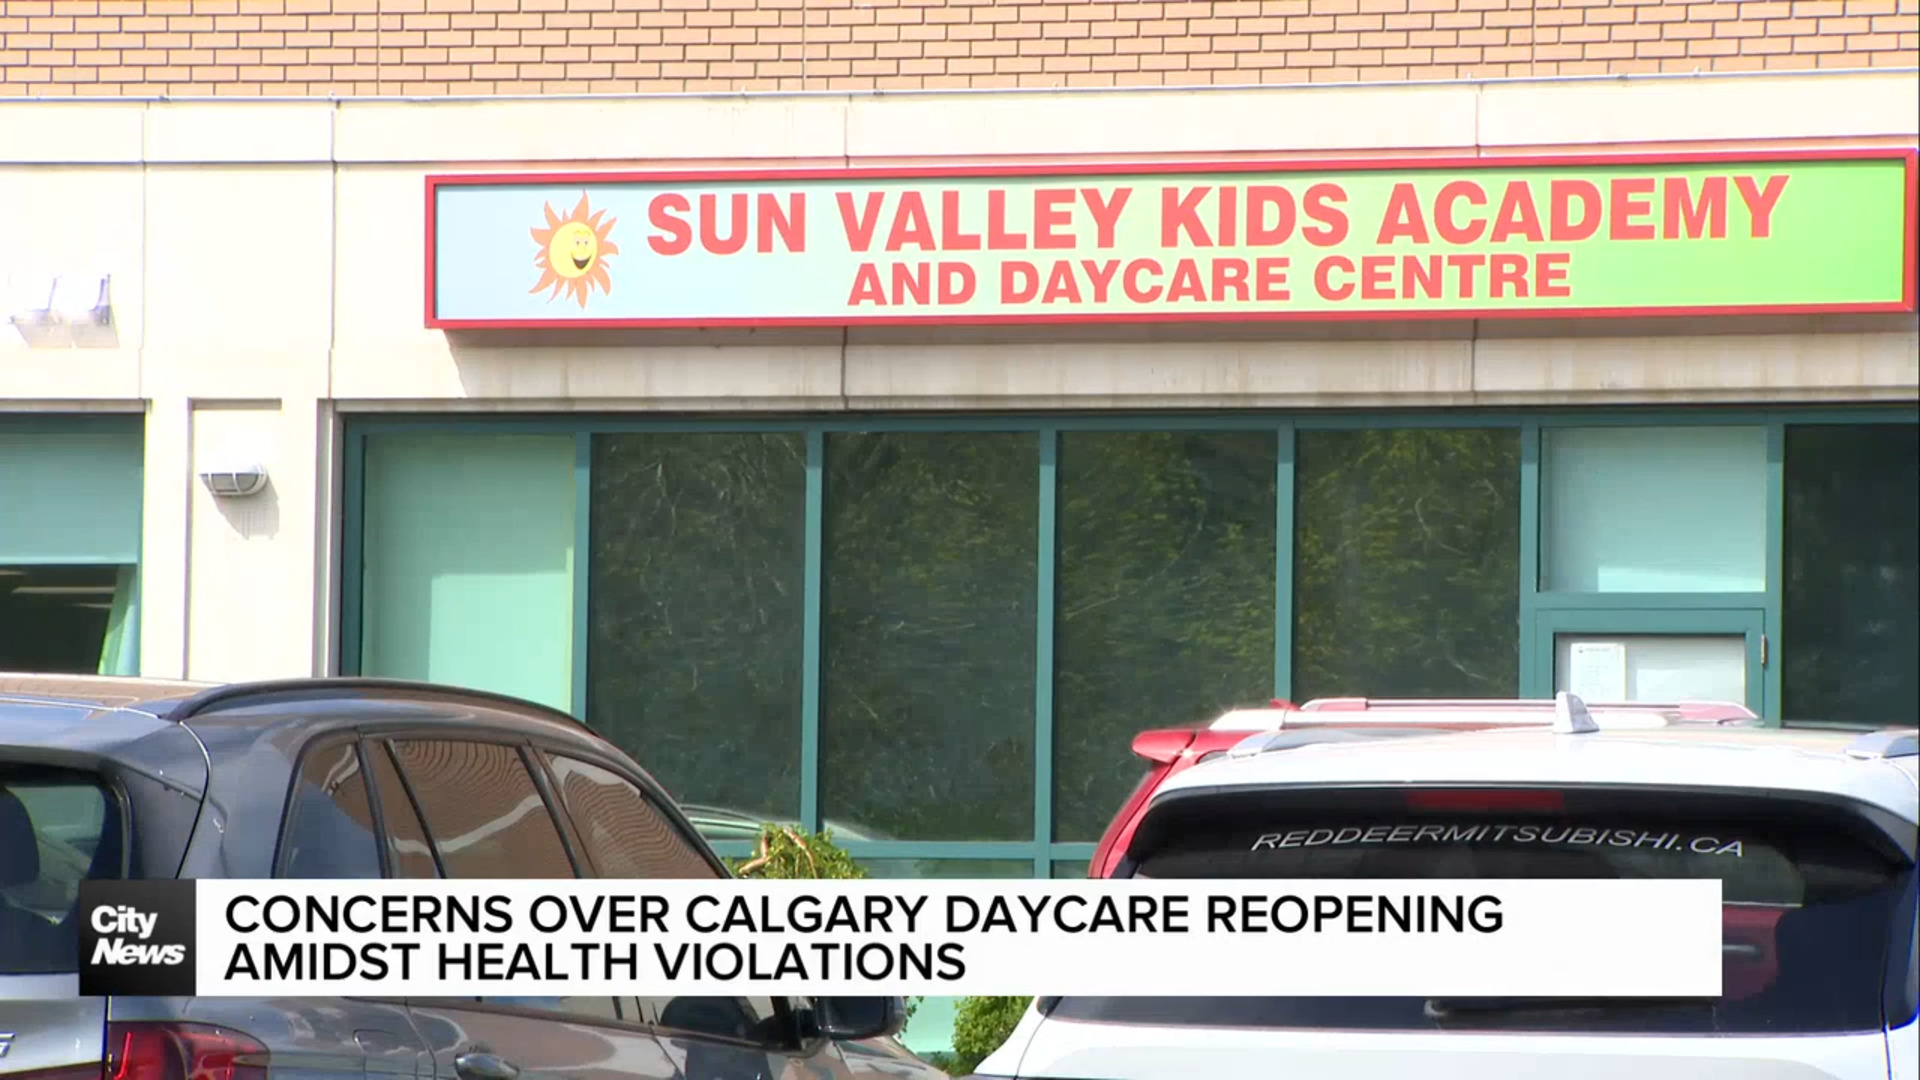 Concerns over Calgary daycare reopening amidst health violations